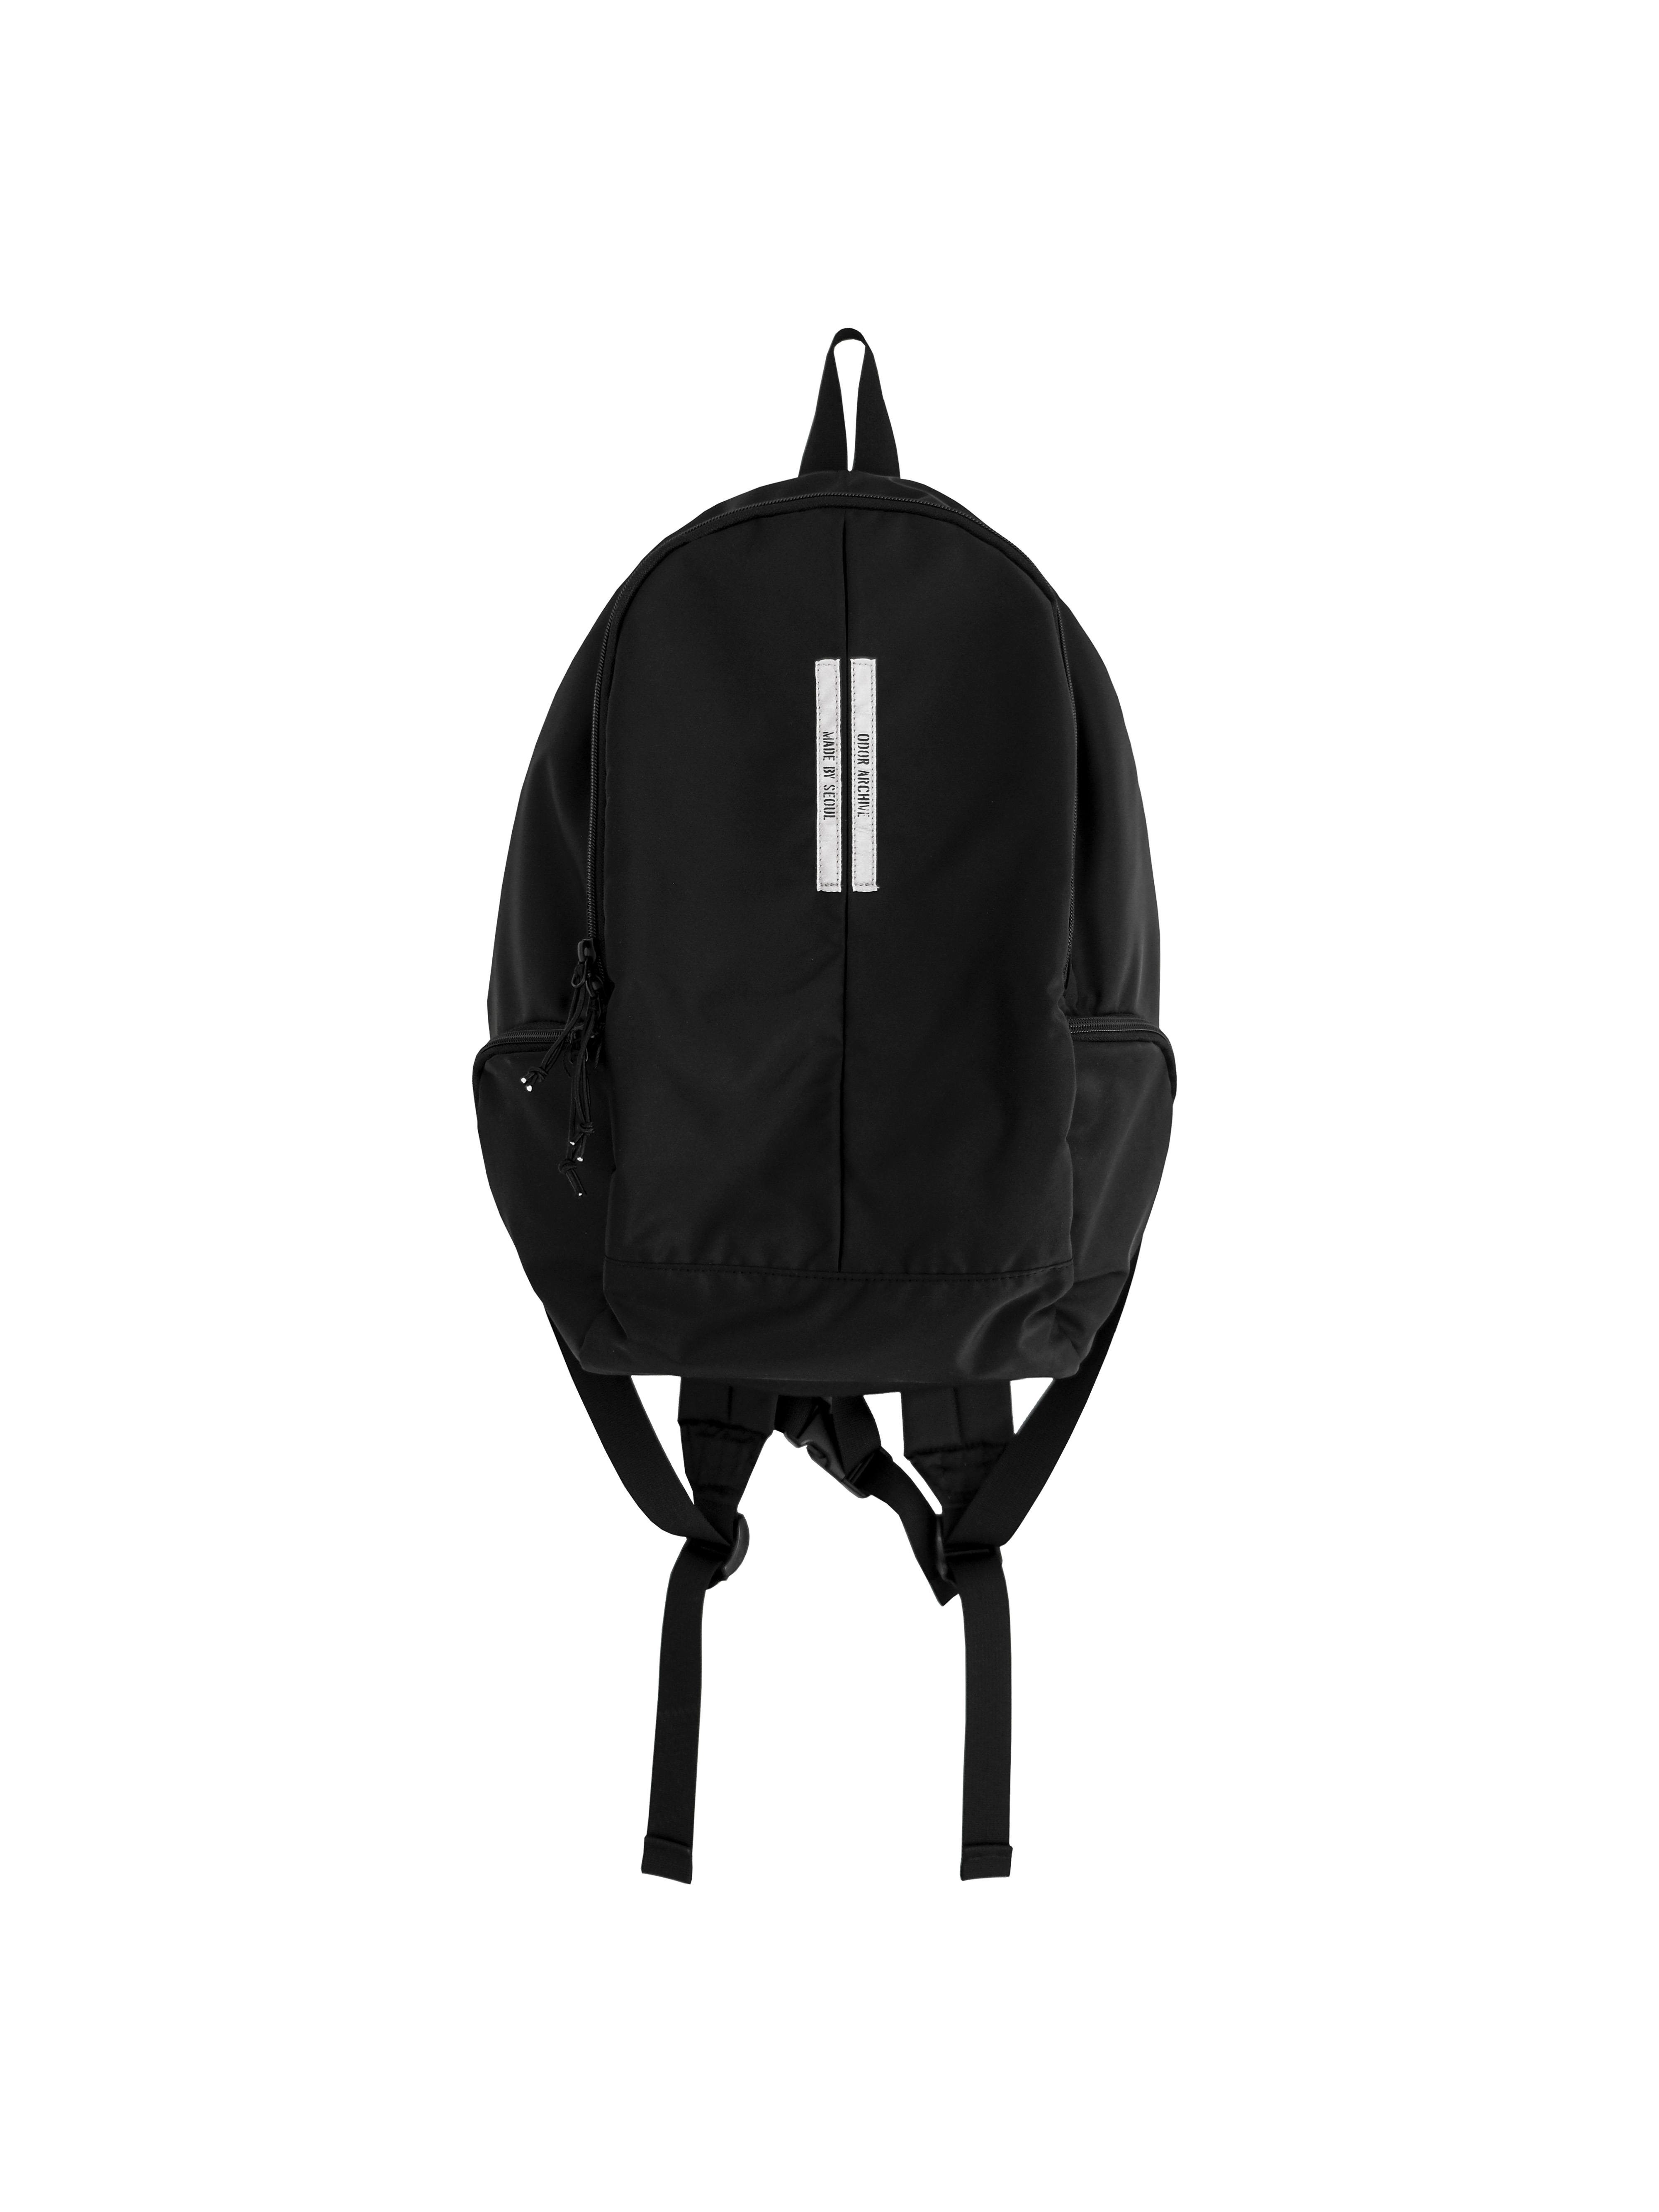 [ODOR MADE] Archive backpack (*2시 이전 단독 주문시 당일출고)